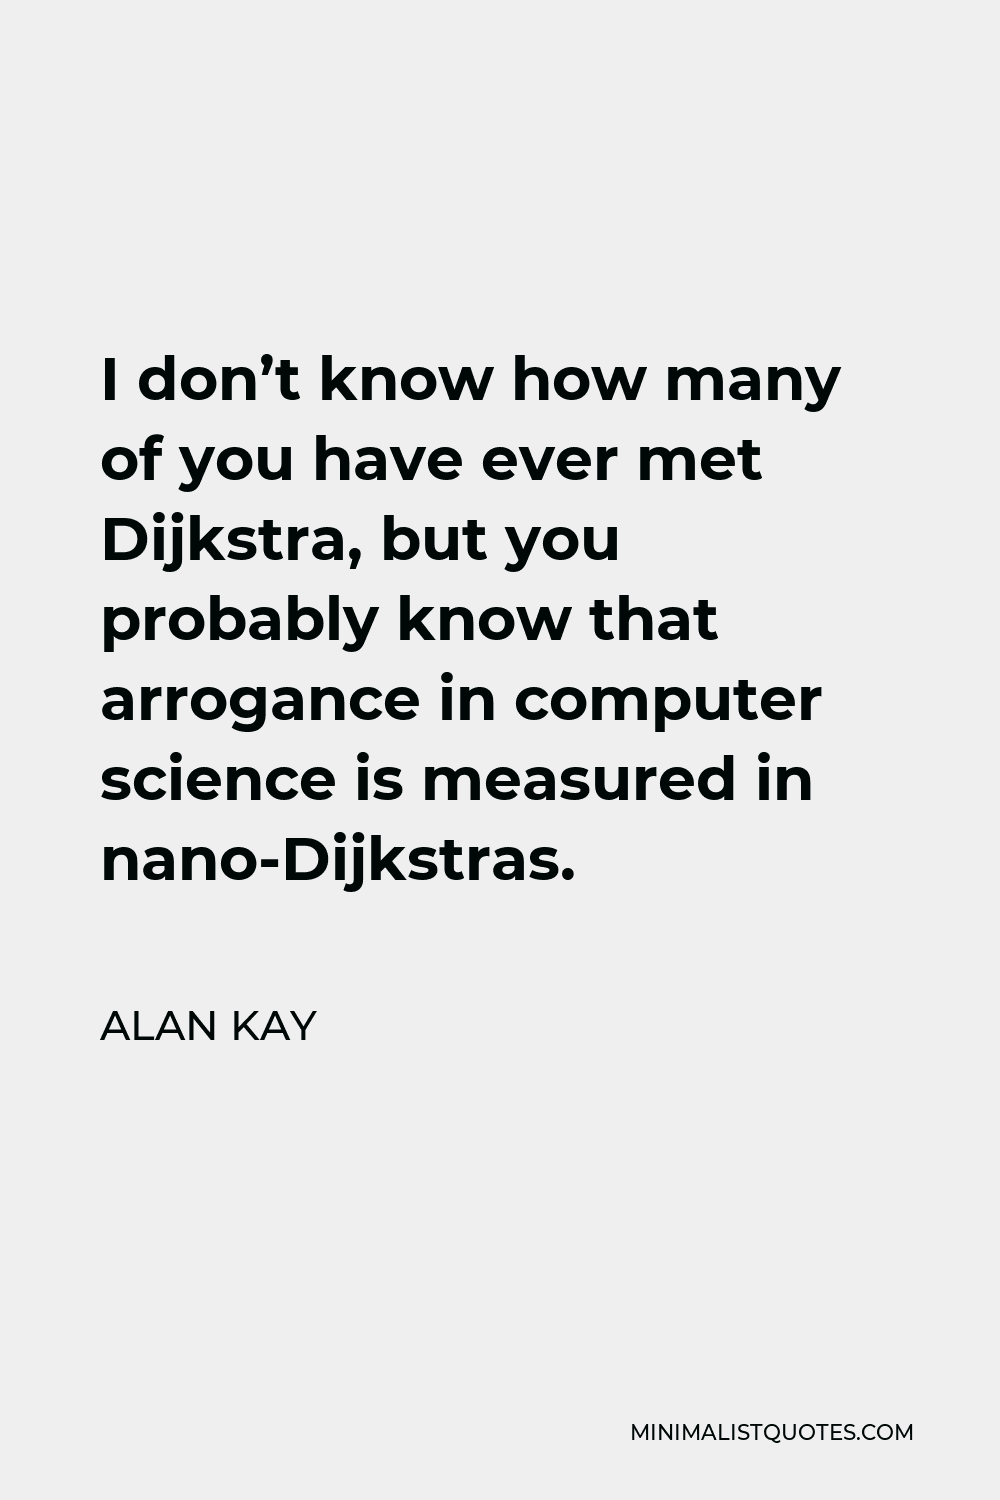 Alan Kay Quote - I don’t know how many of you have ever met Dijkstra, but you probably know that arrogance in computer science is measured in nano-Dijkstras.